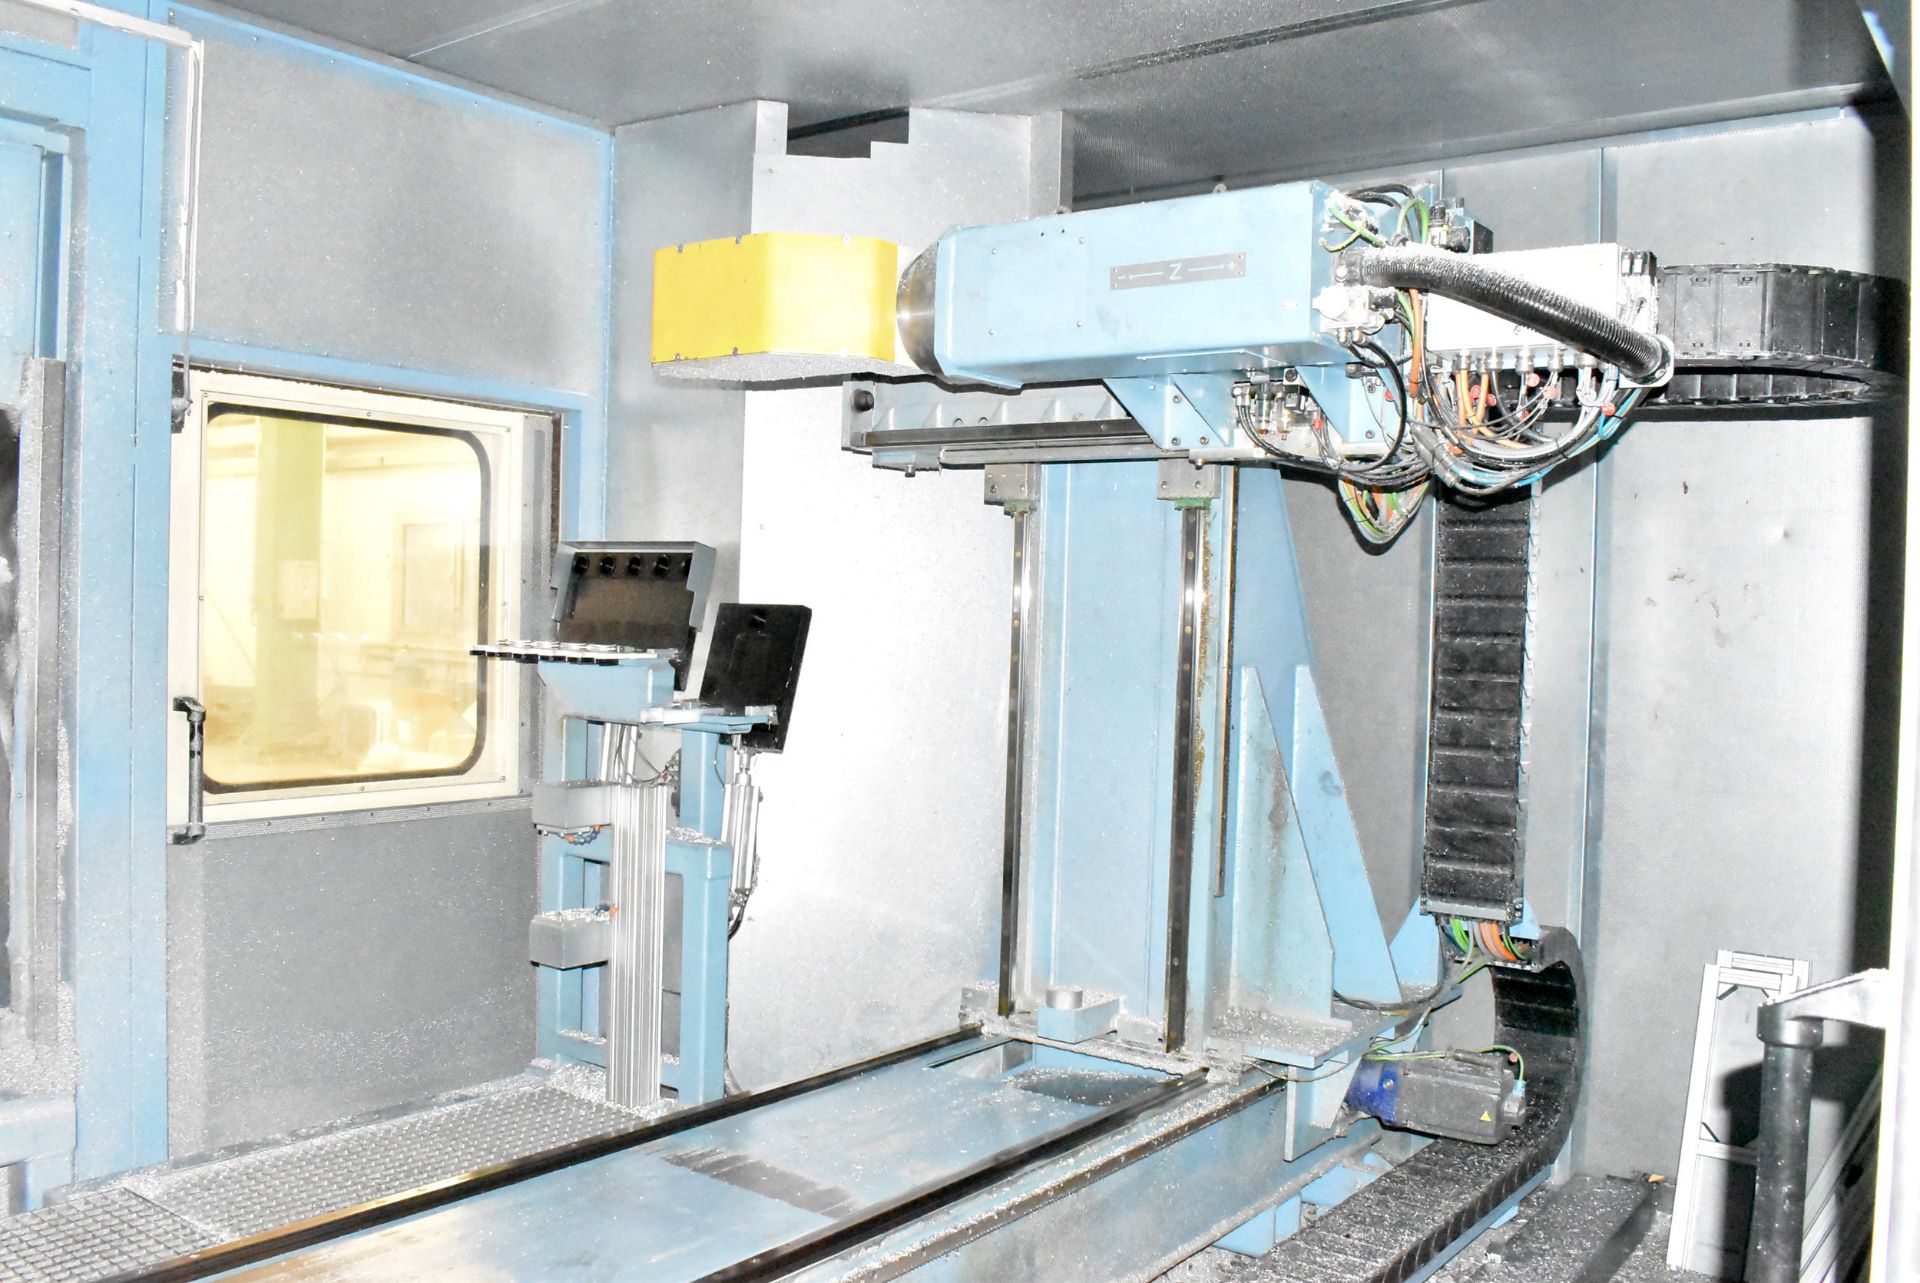 MAKA (2012) DC7D 7 AXIS CNC MACHINING CENTER WITH SIEMENS SINEUMERIK TOUCH SCREEN CNC CONTROL, - Image 7 of 12